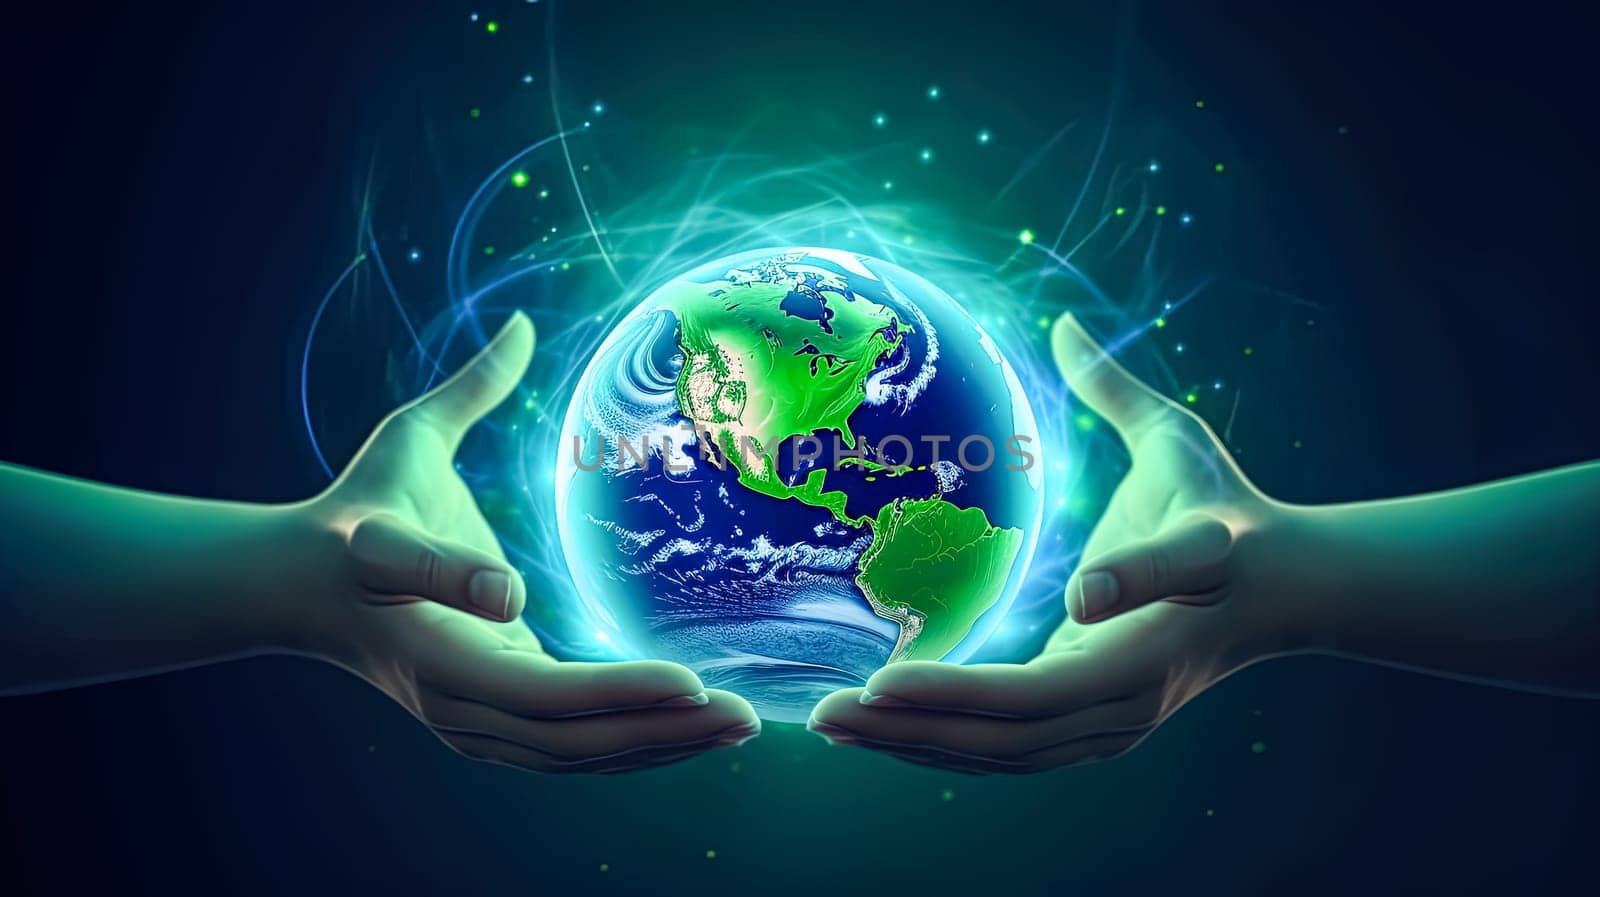 In caring hands, A man gently holds our planet a symbolic gesture urging responsible electricity use and nature conservation